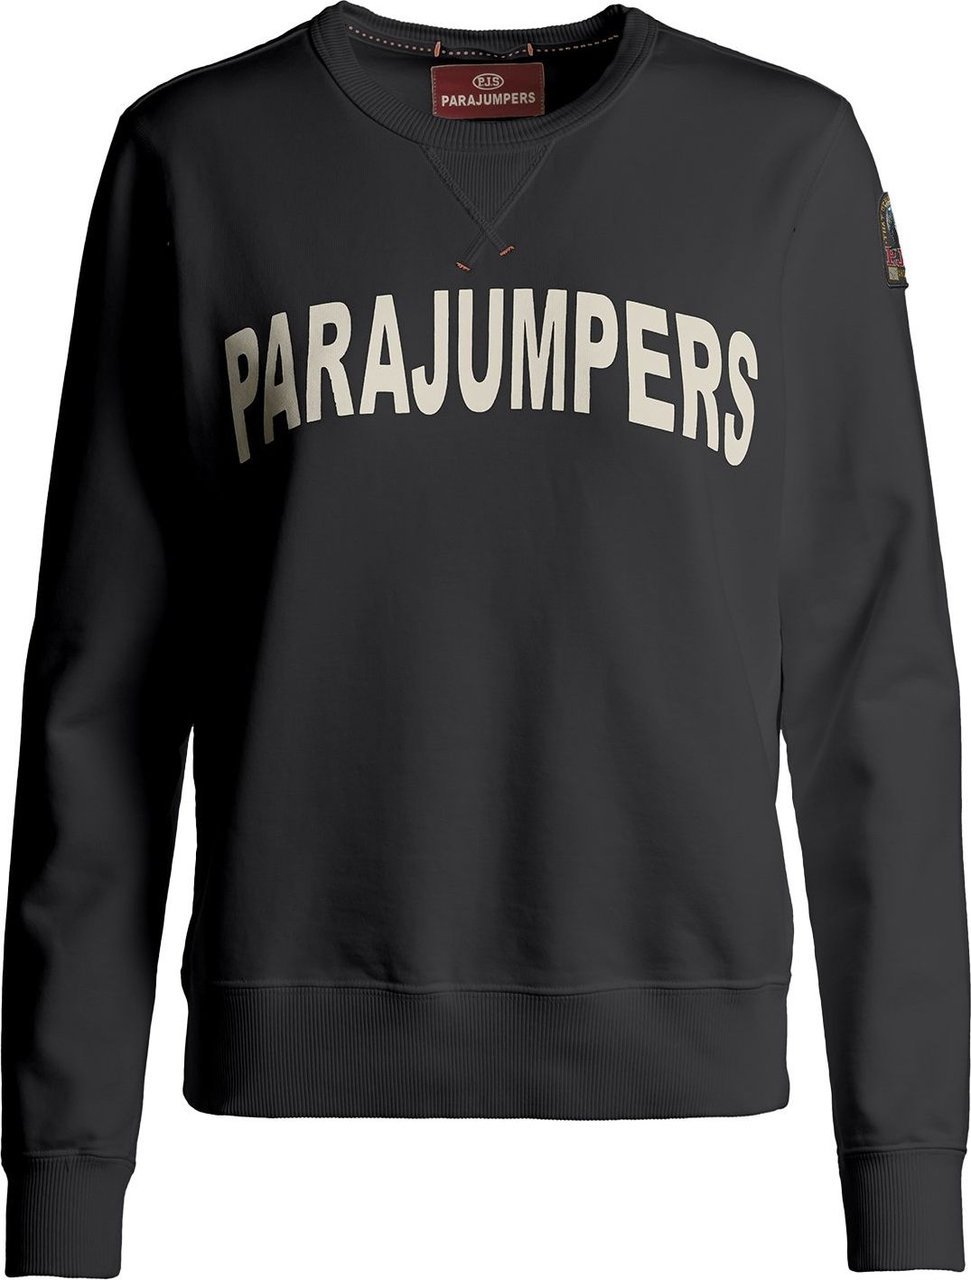 Parajumpers Parajumpers Sweater Bianca Donkerblauw Blauw